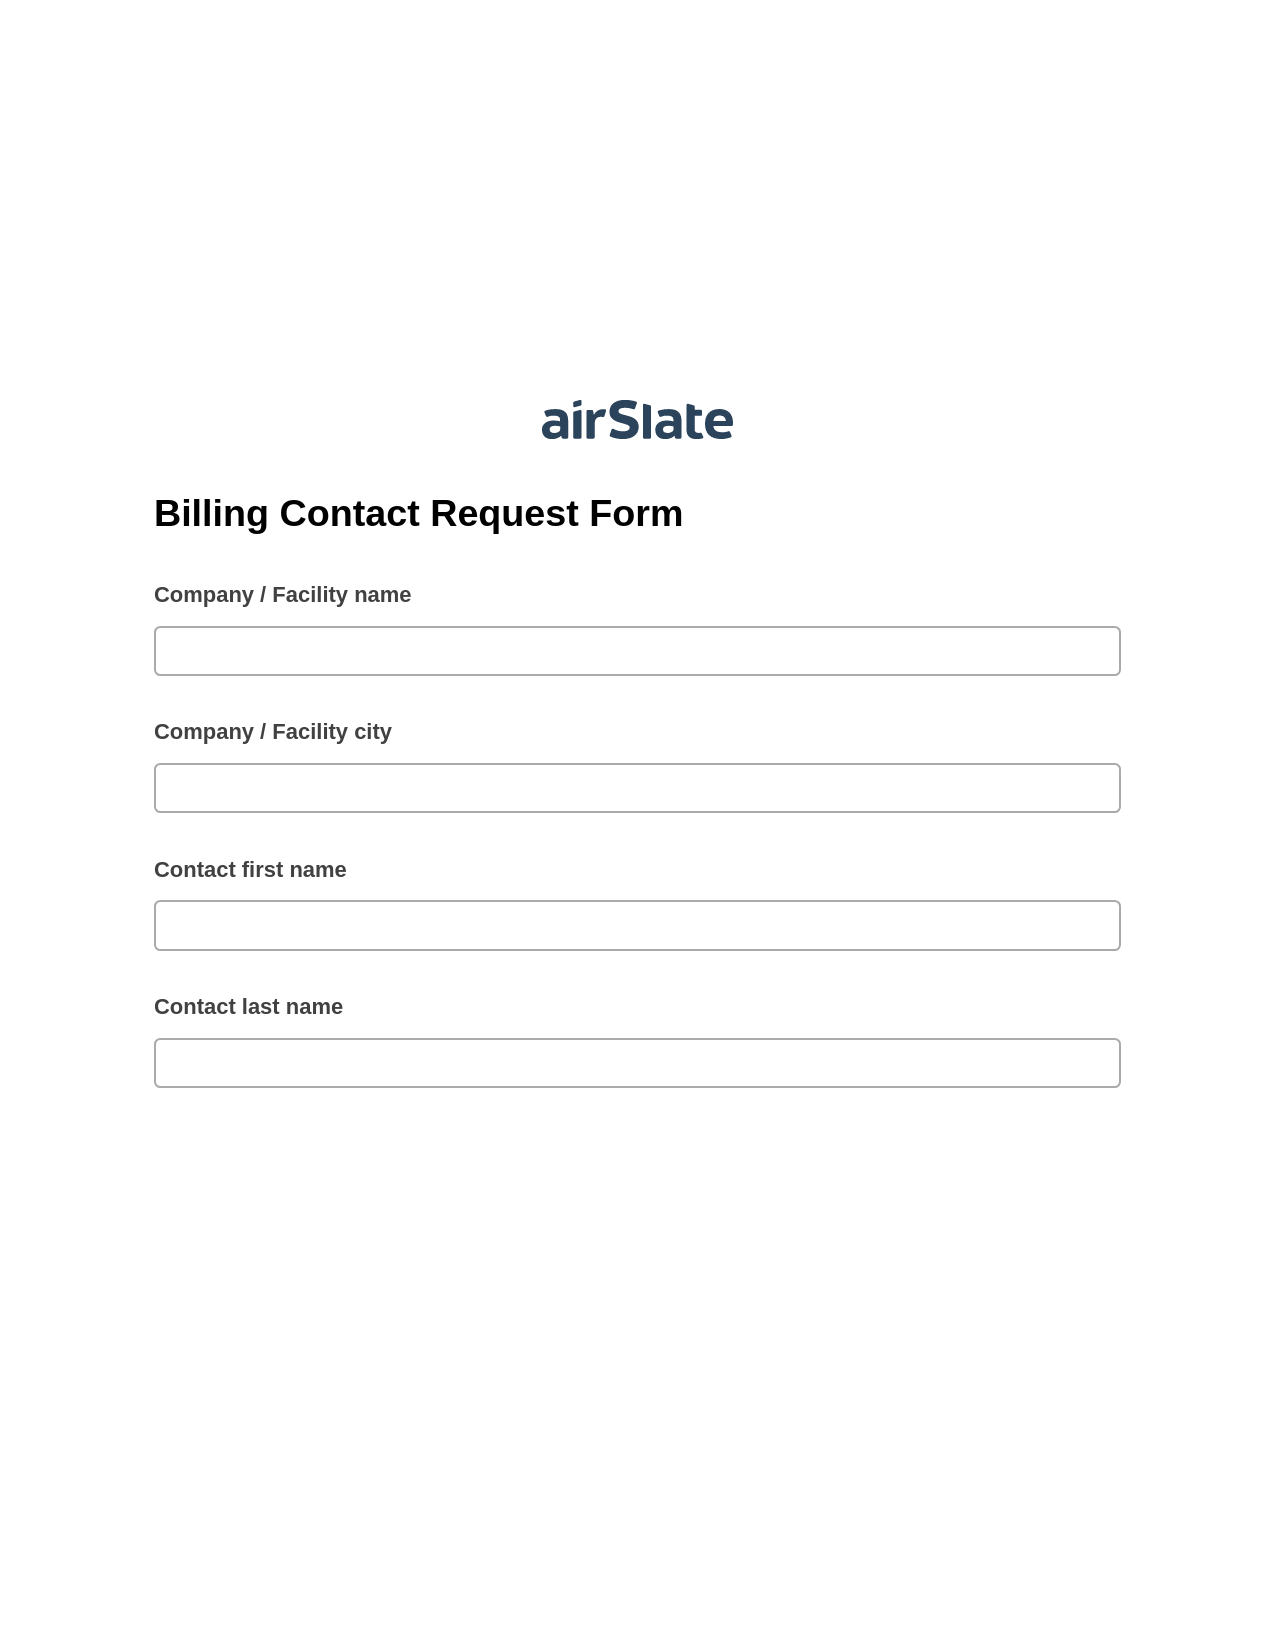 Billing Contact Request Form Pre-fill Document Bot, Jira Bot, Export to Salesforce Bot